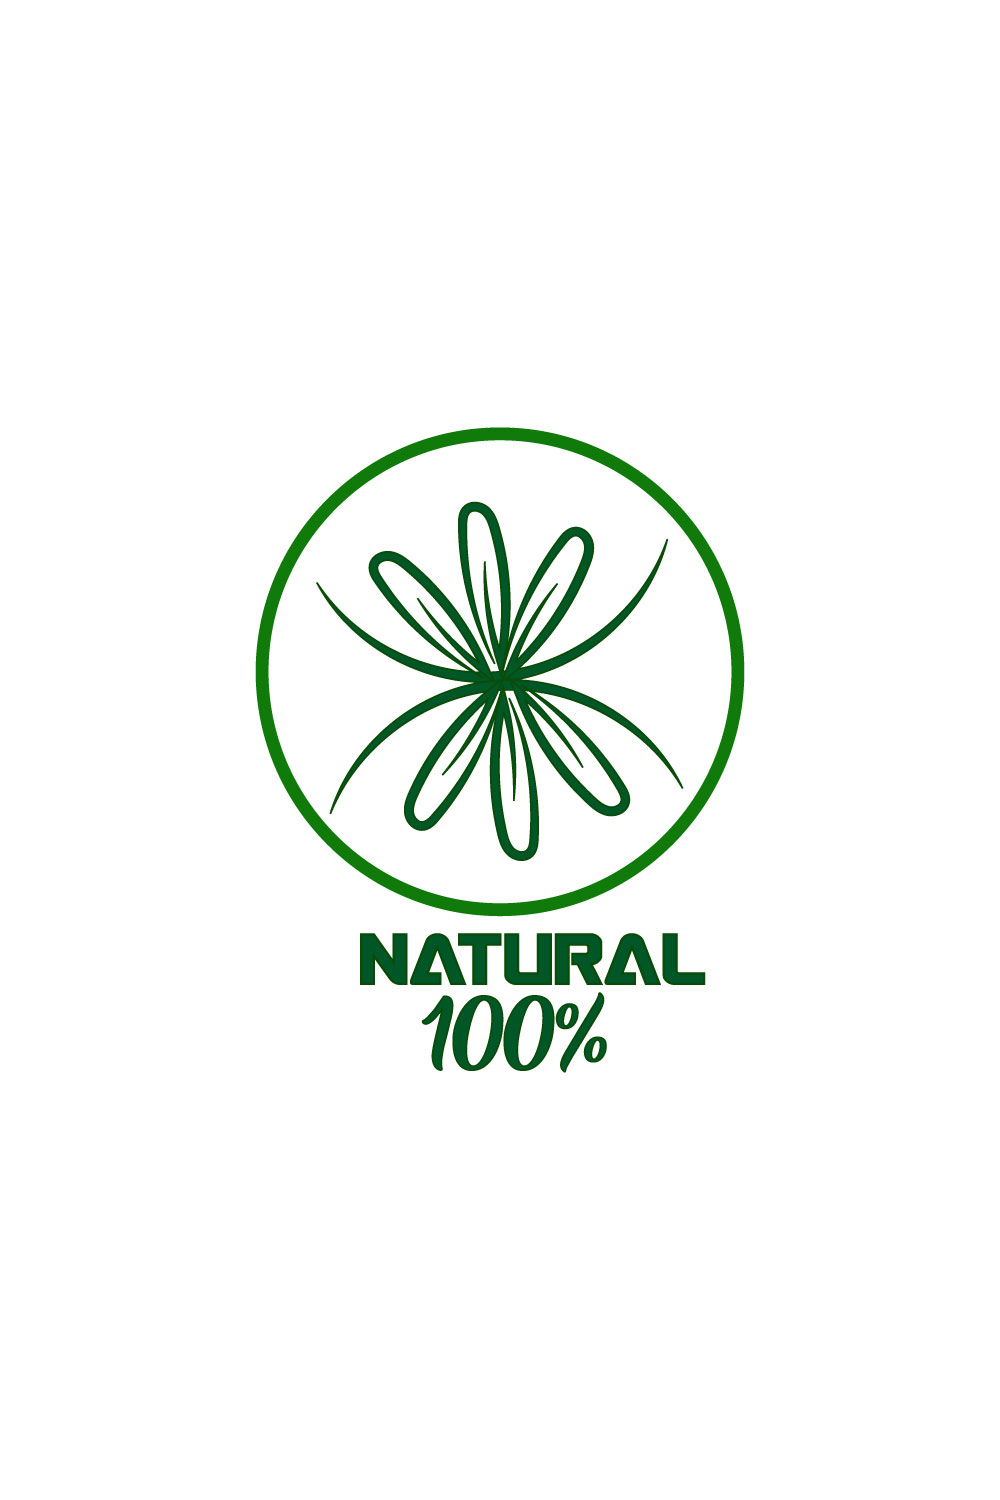 Free green nature logo pinterest preview image.